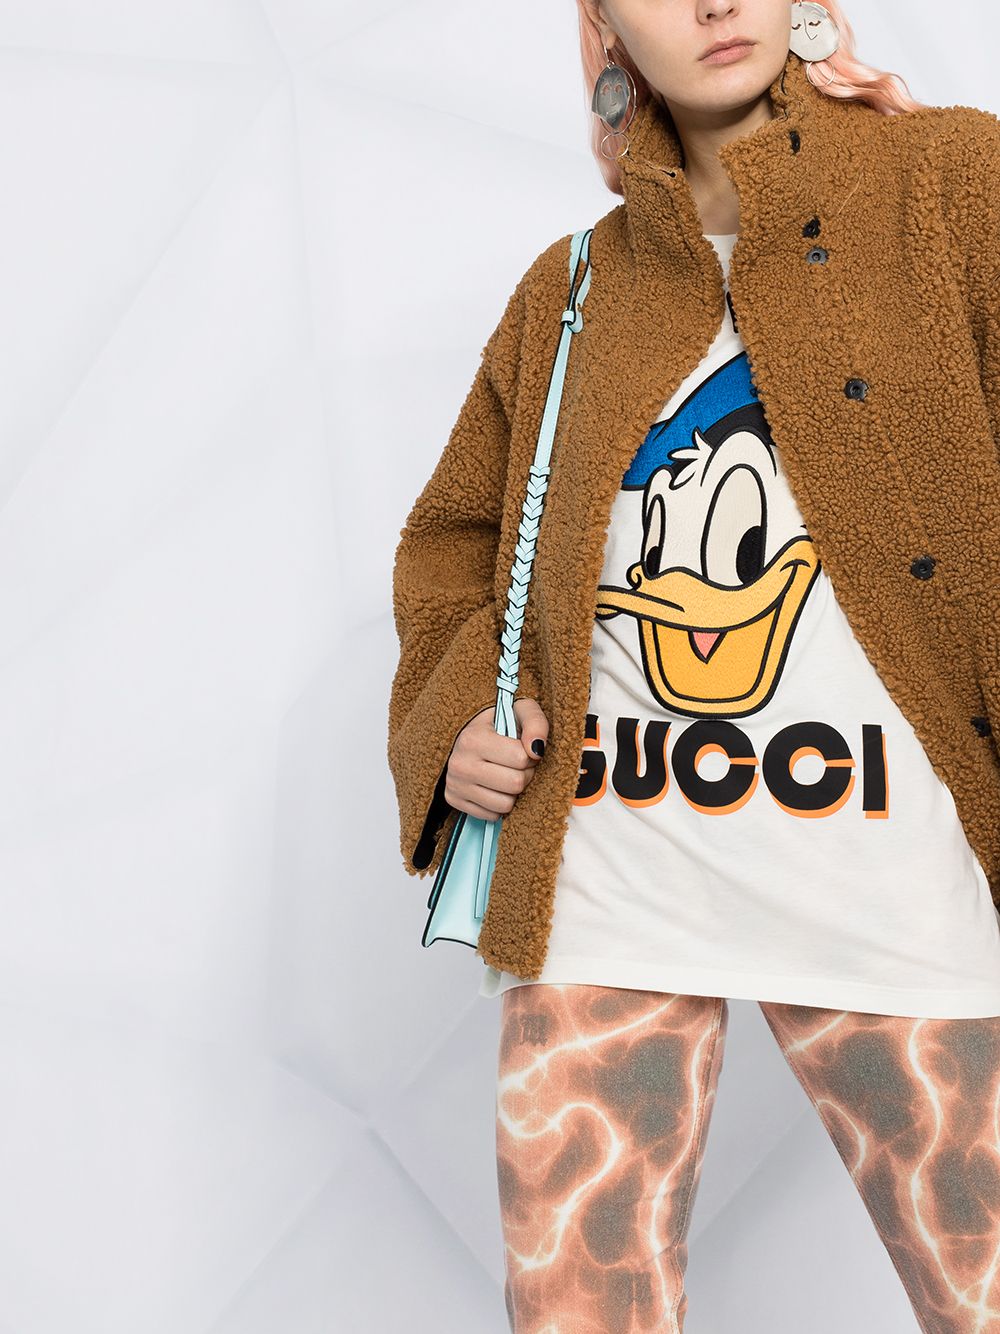 NEW Gucci Donald Duck Luxury Brand Gold Color 3D T-Shirt Limited